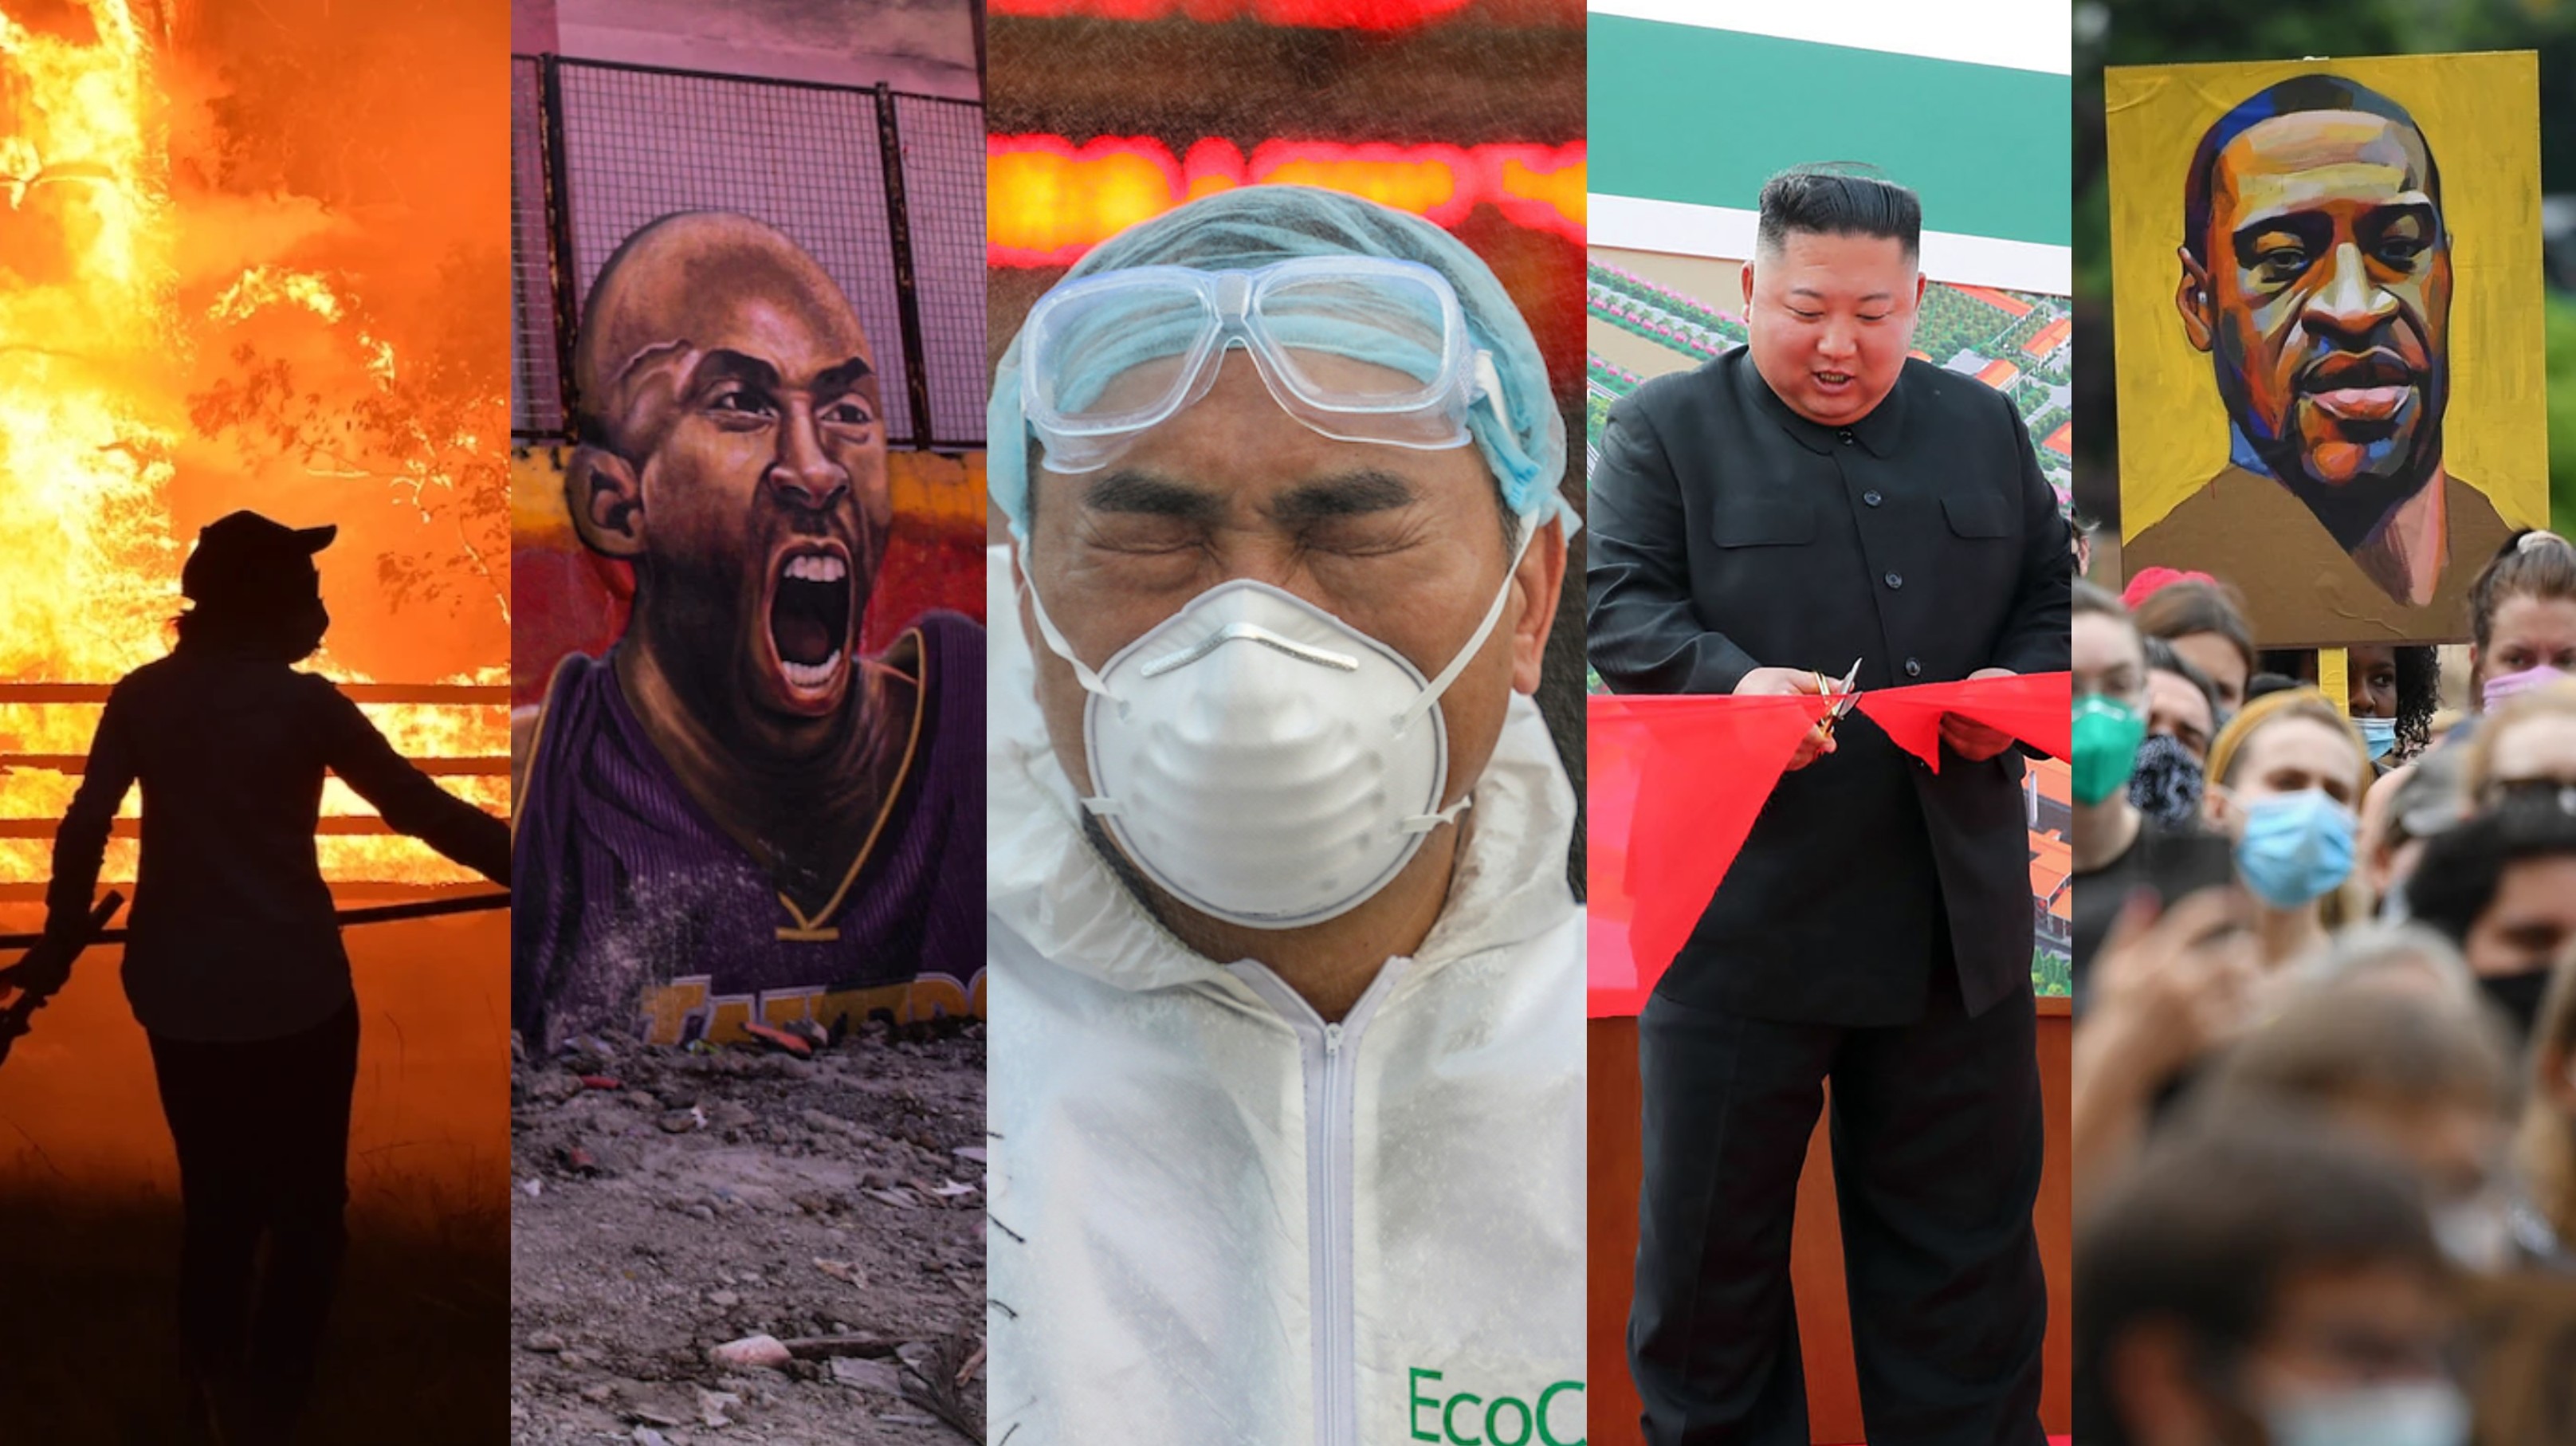 A Mid-Year Roundup of Important Events That Happened in 2020